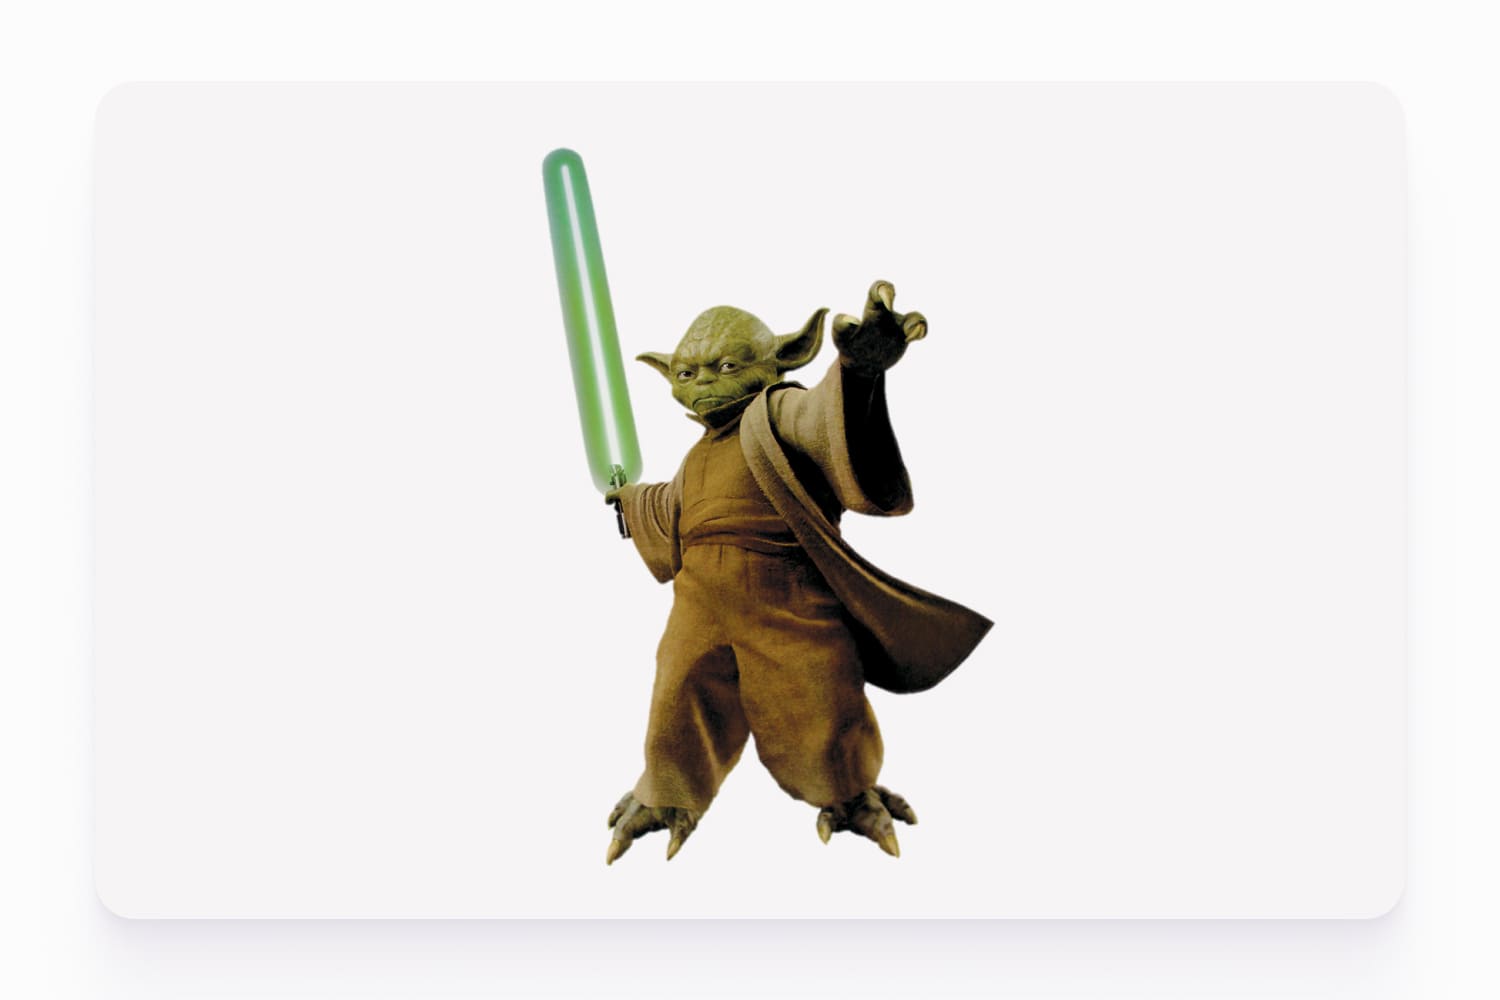 Image of Master Yoda with a sword.